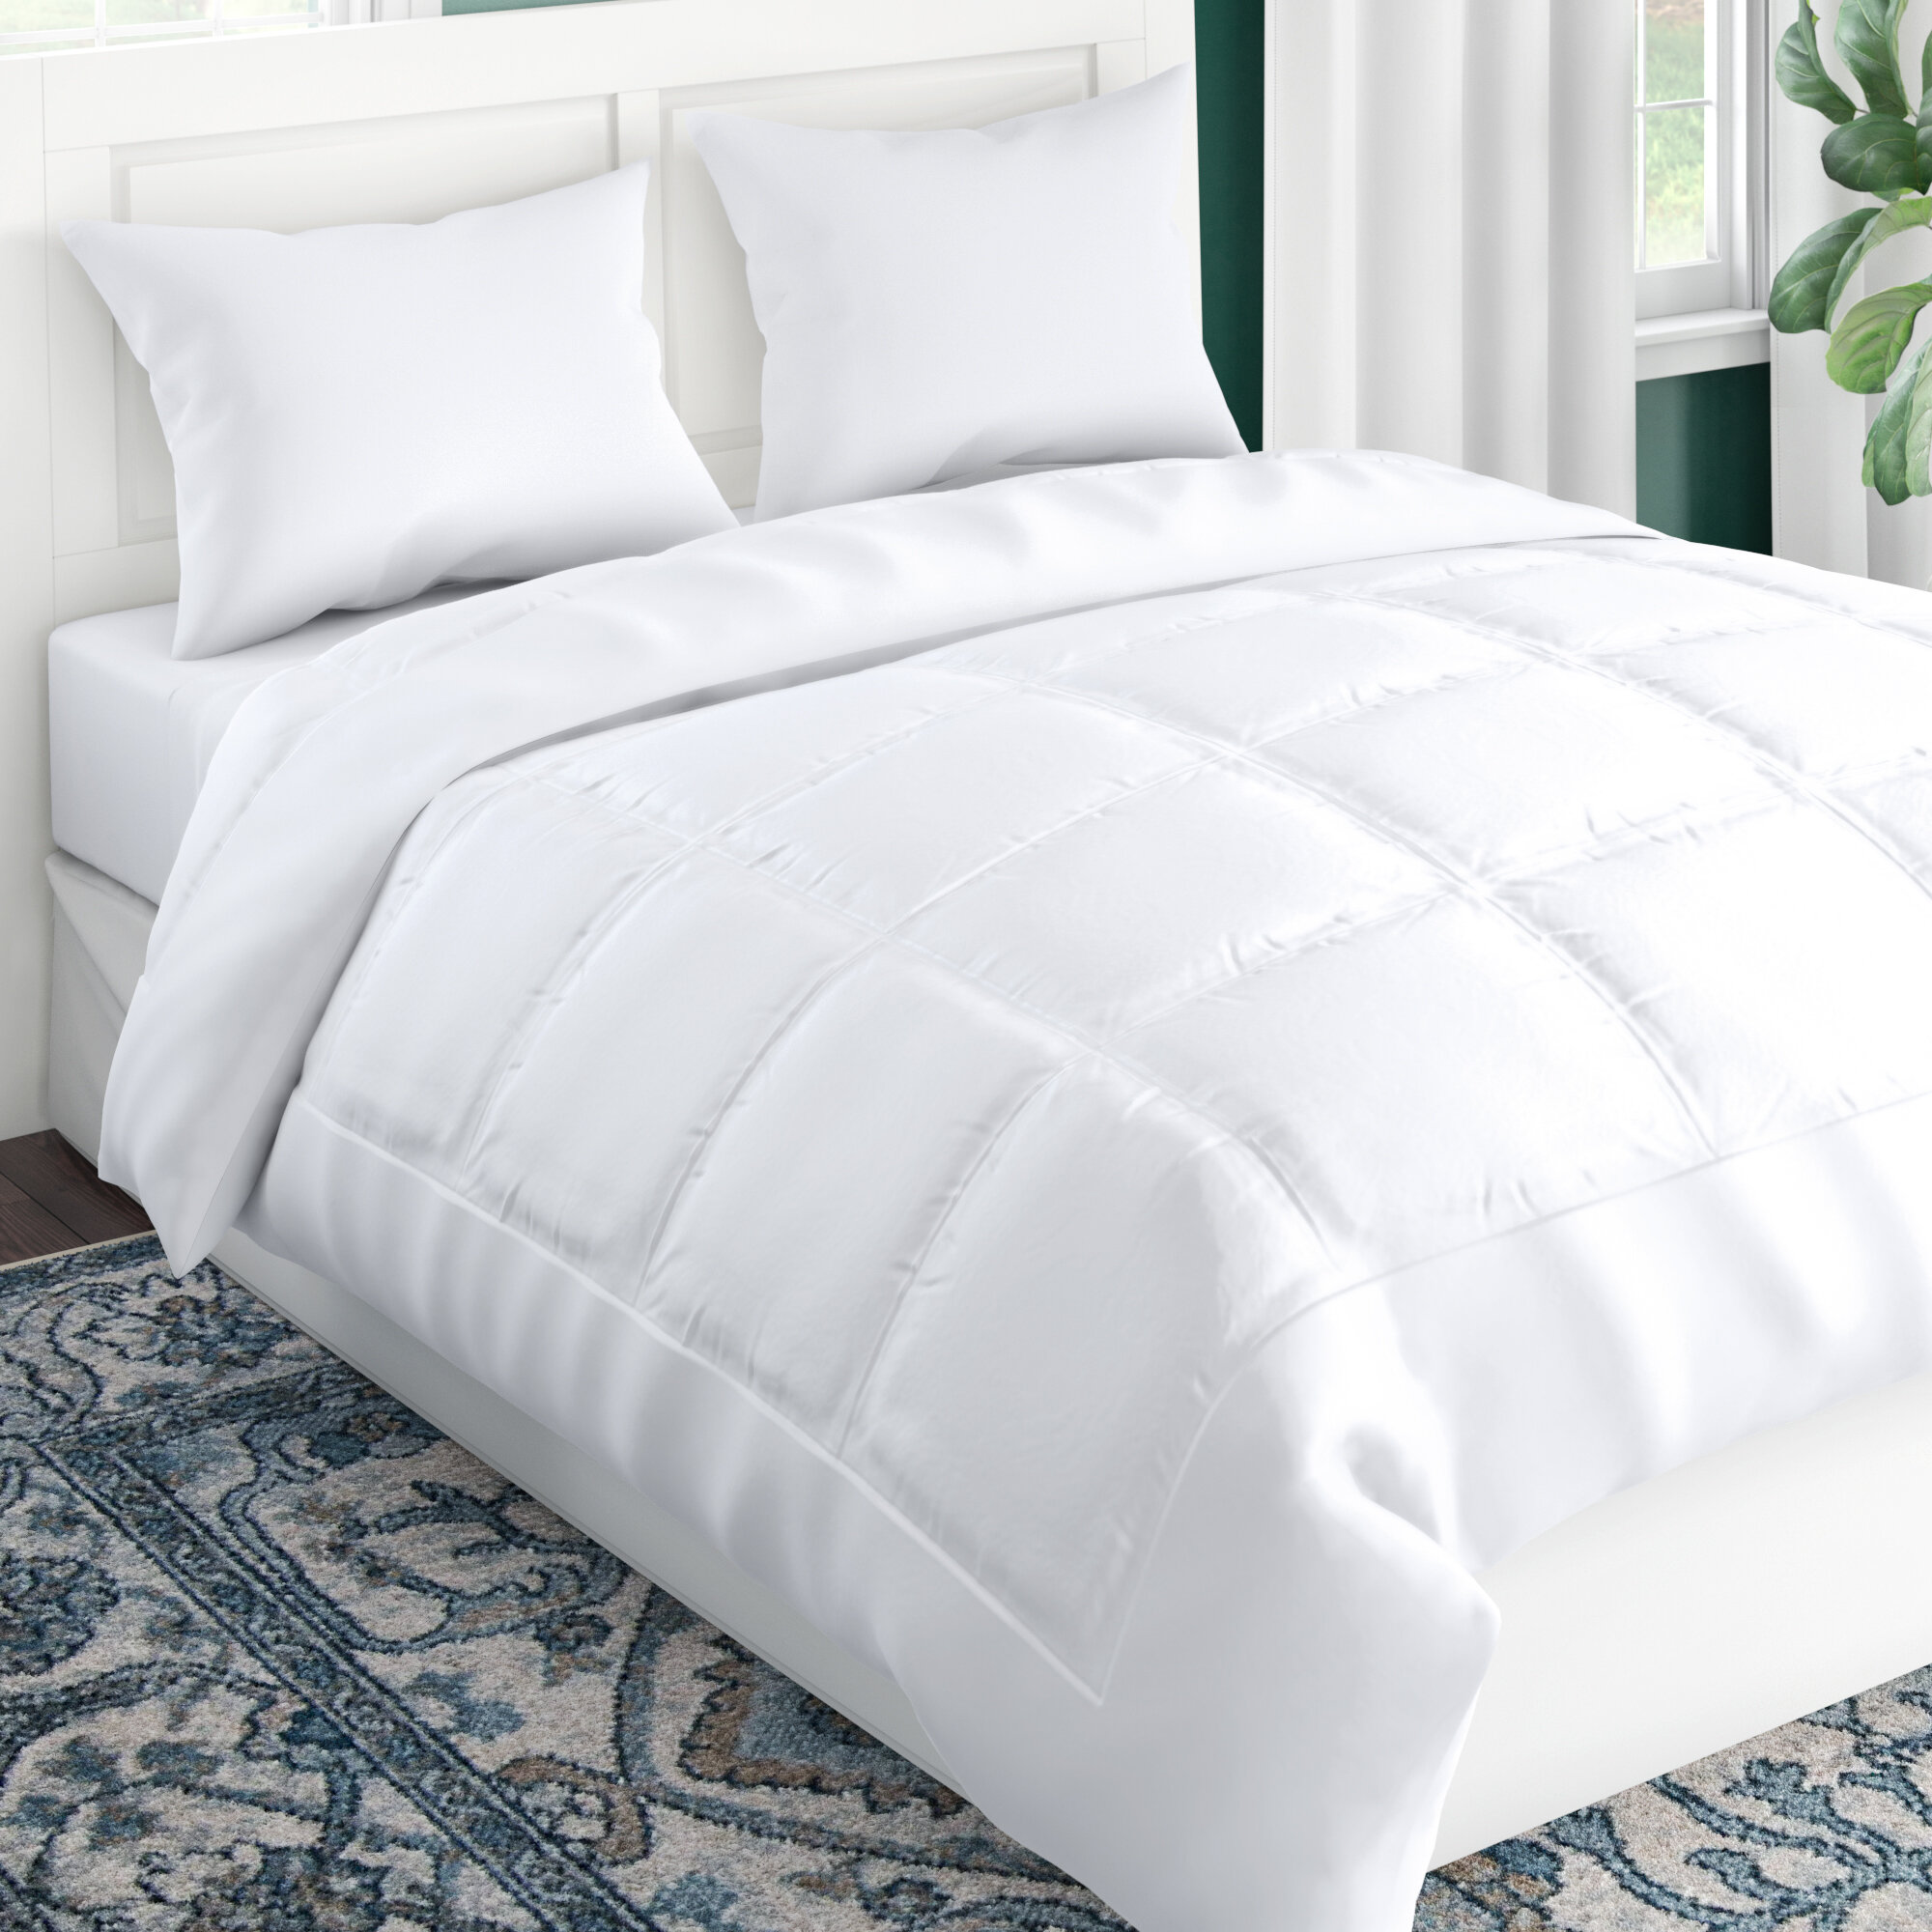 White Twin Duvet Insert with Corner Tabs Utopia Bedding All Season Down Alternative Quilted Comforter Twin Duvet Insert Stand Alone Comforter Machine Washable Twin/Twin XL